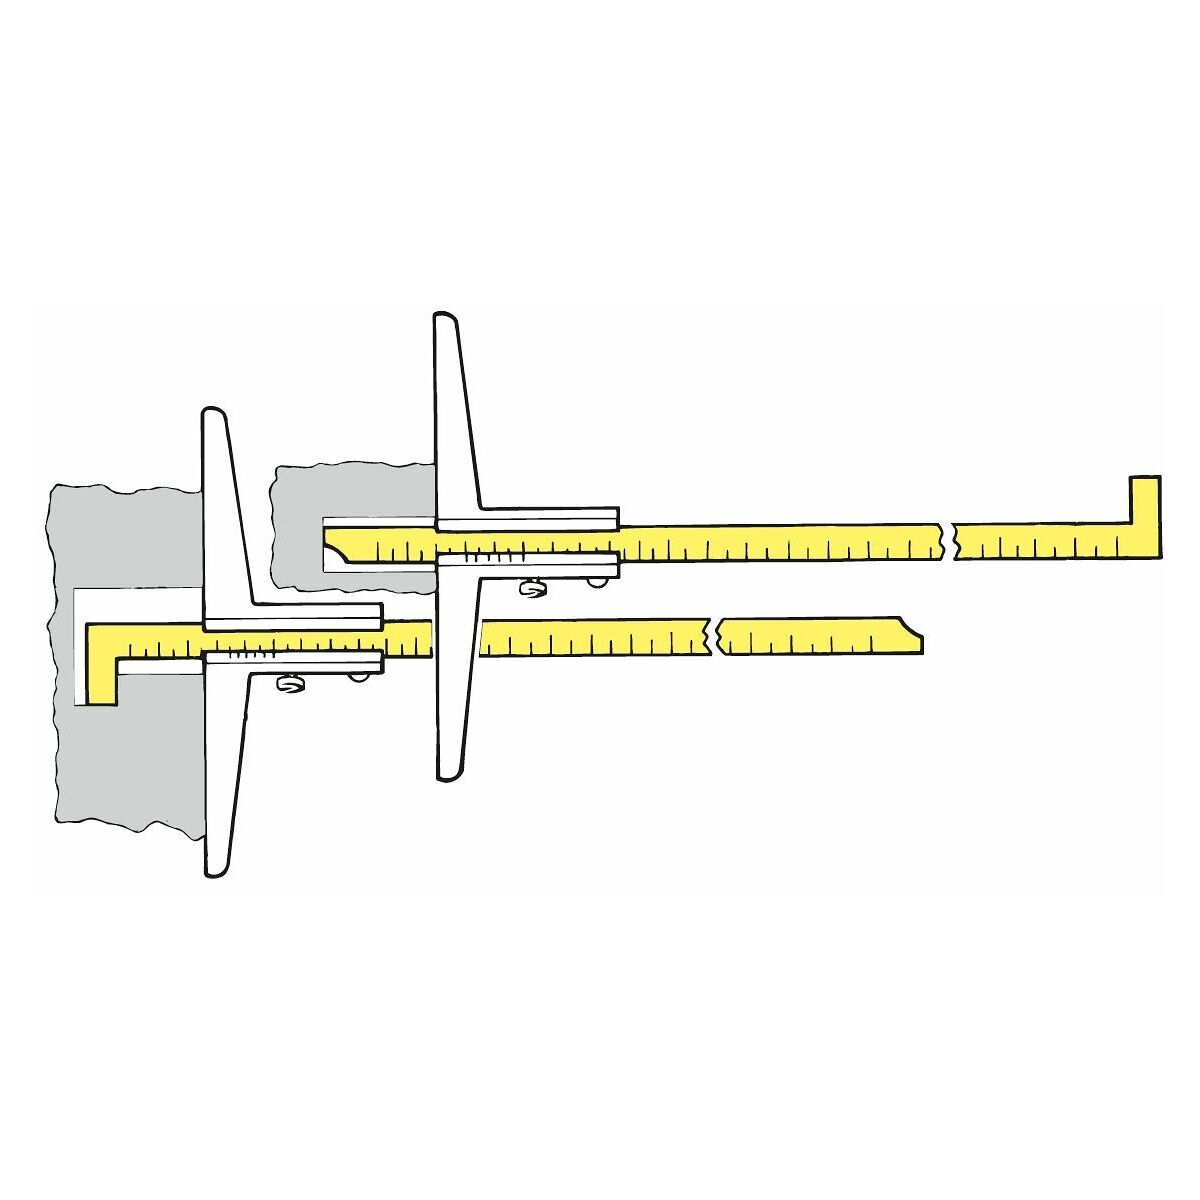 Draw a neat labeled diagram of a screw gauge. Name its main parts and state  their functions.